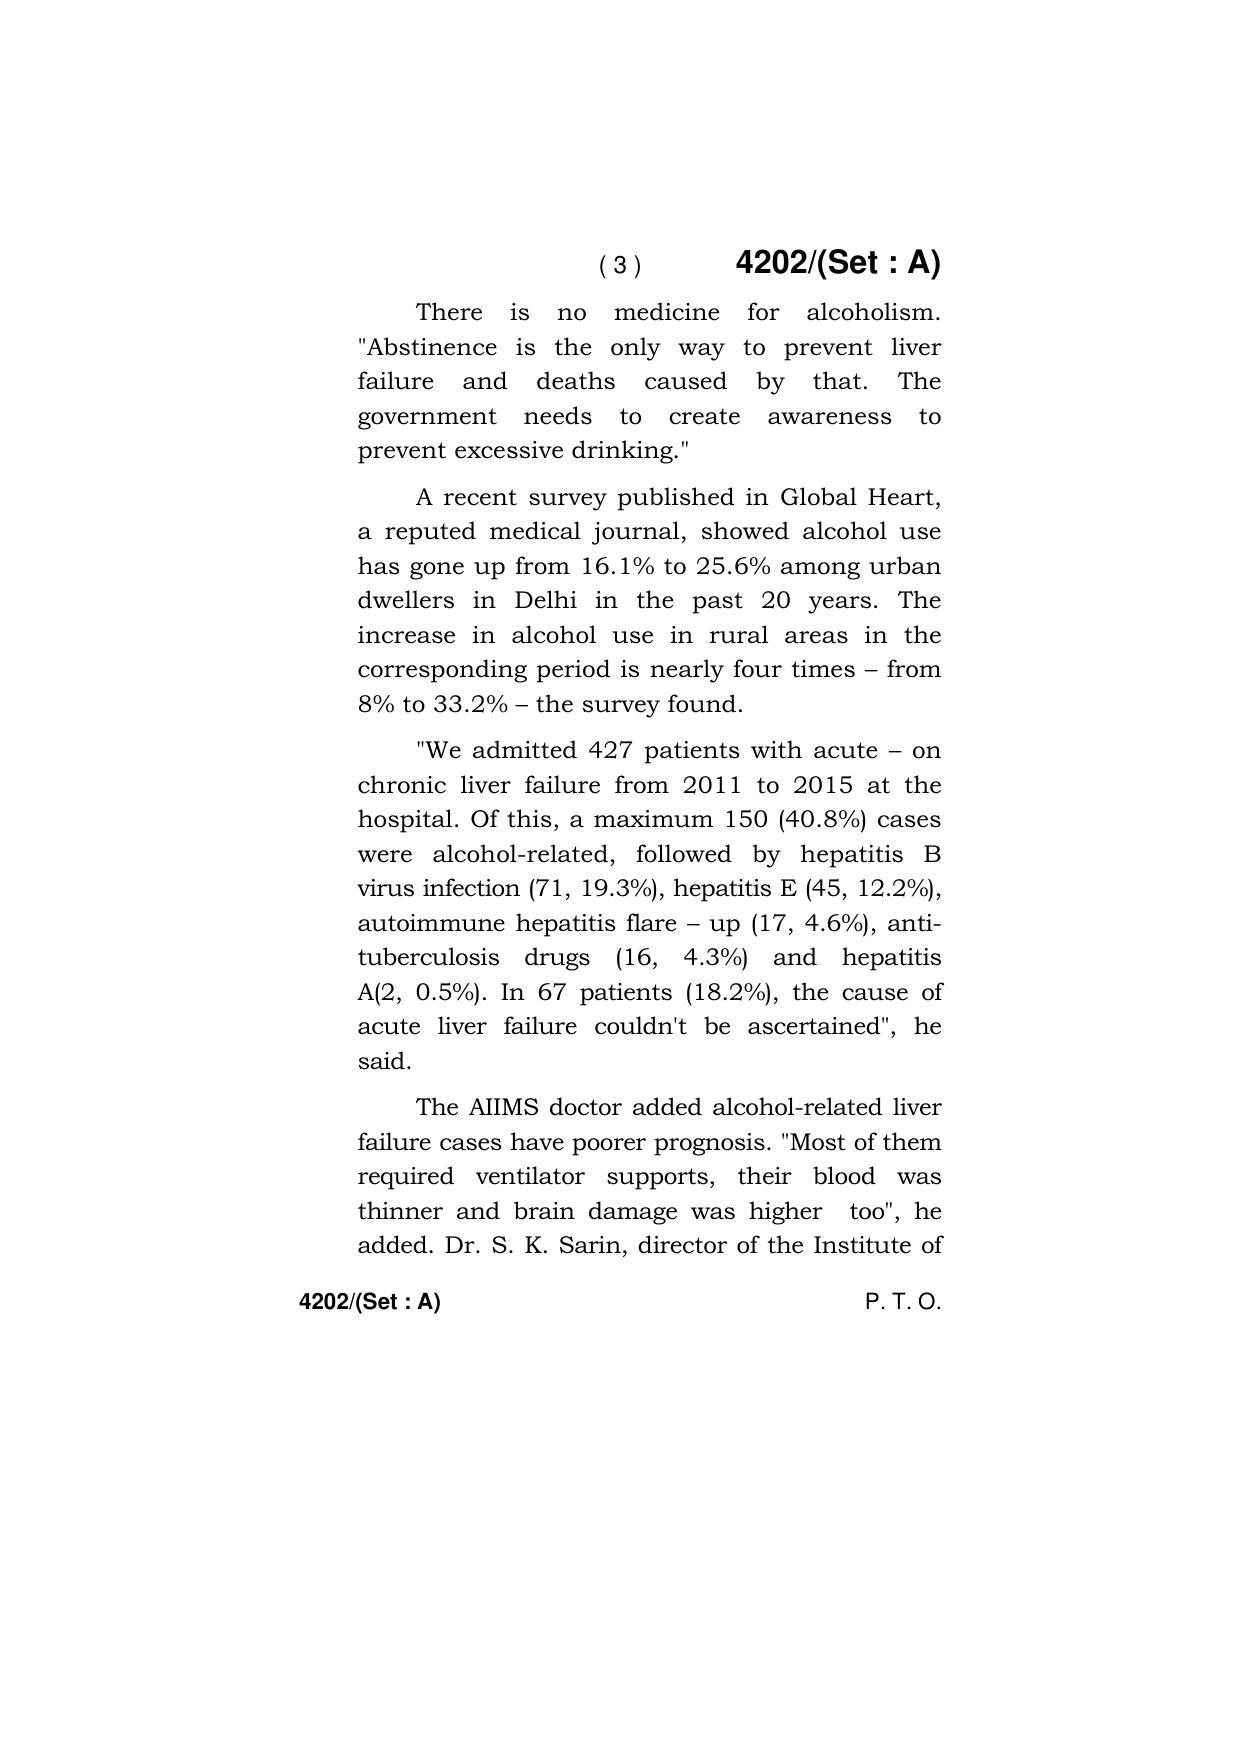 Haryana Board HBSE Class 10 English (All Set) 2019 Question Paper - Page 3